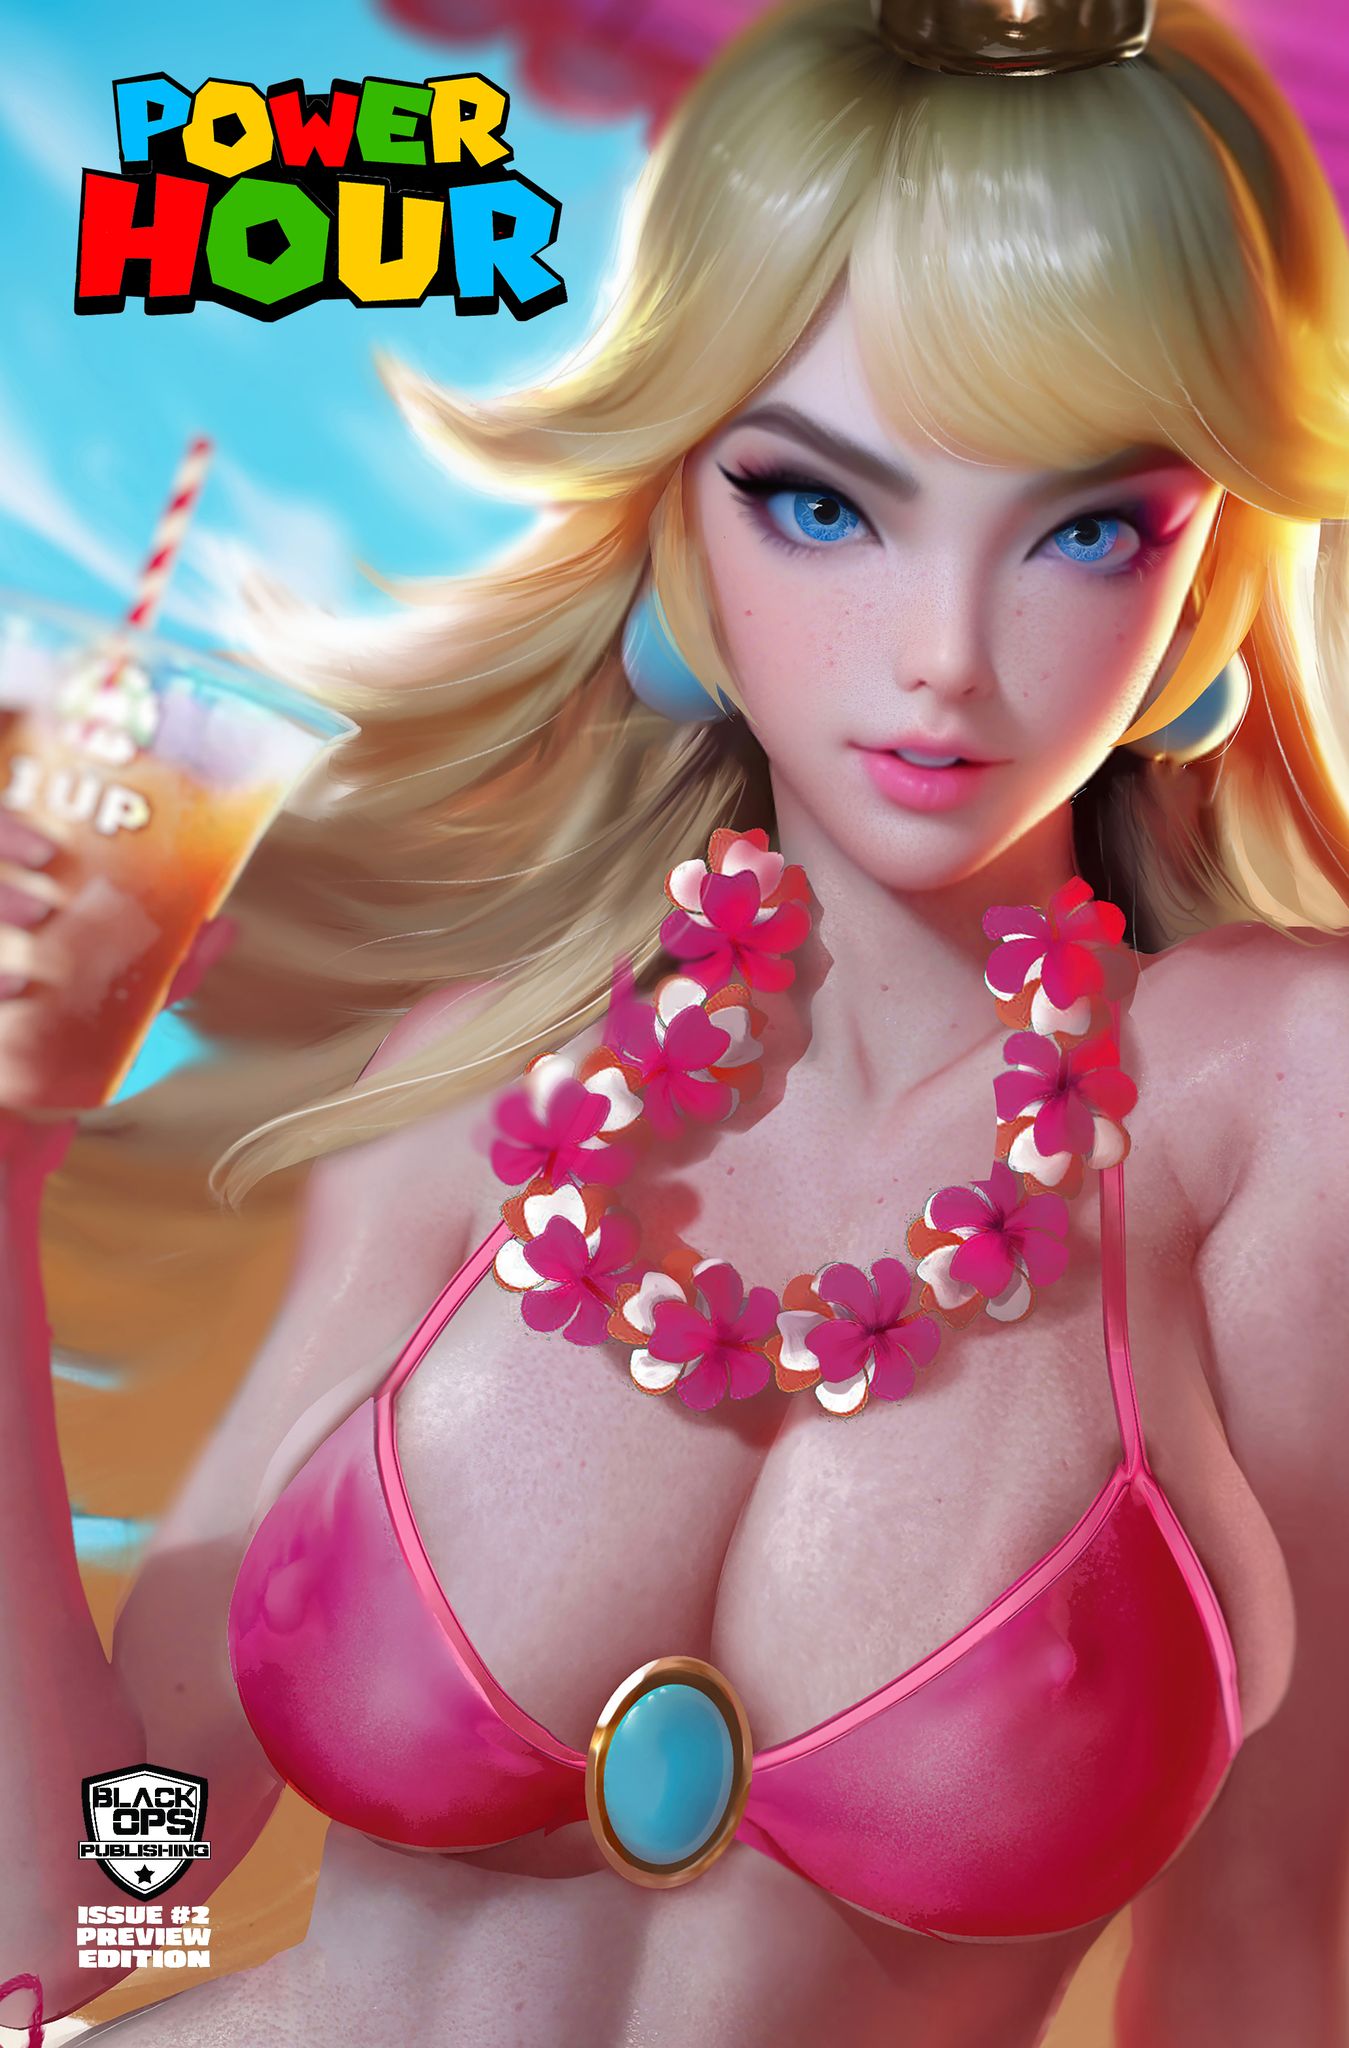 POWER HOUR #2 PEACH EXCLUSIVE PREVIEW